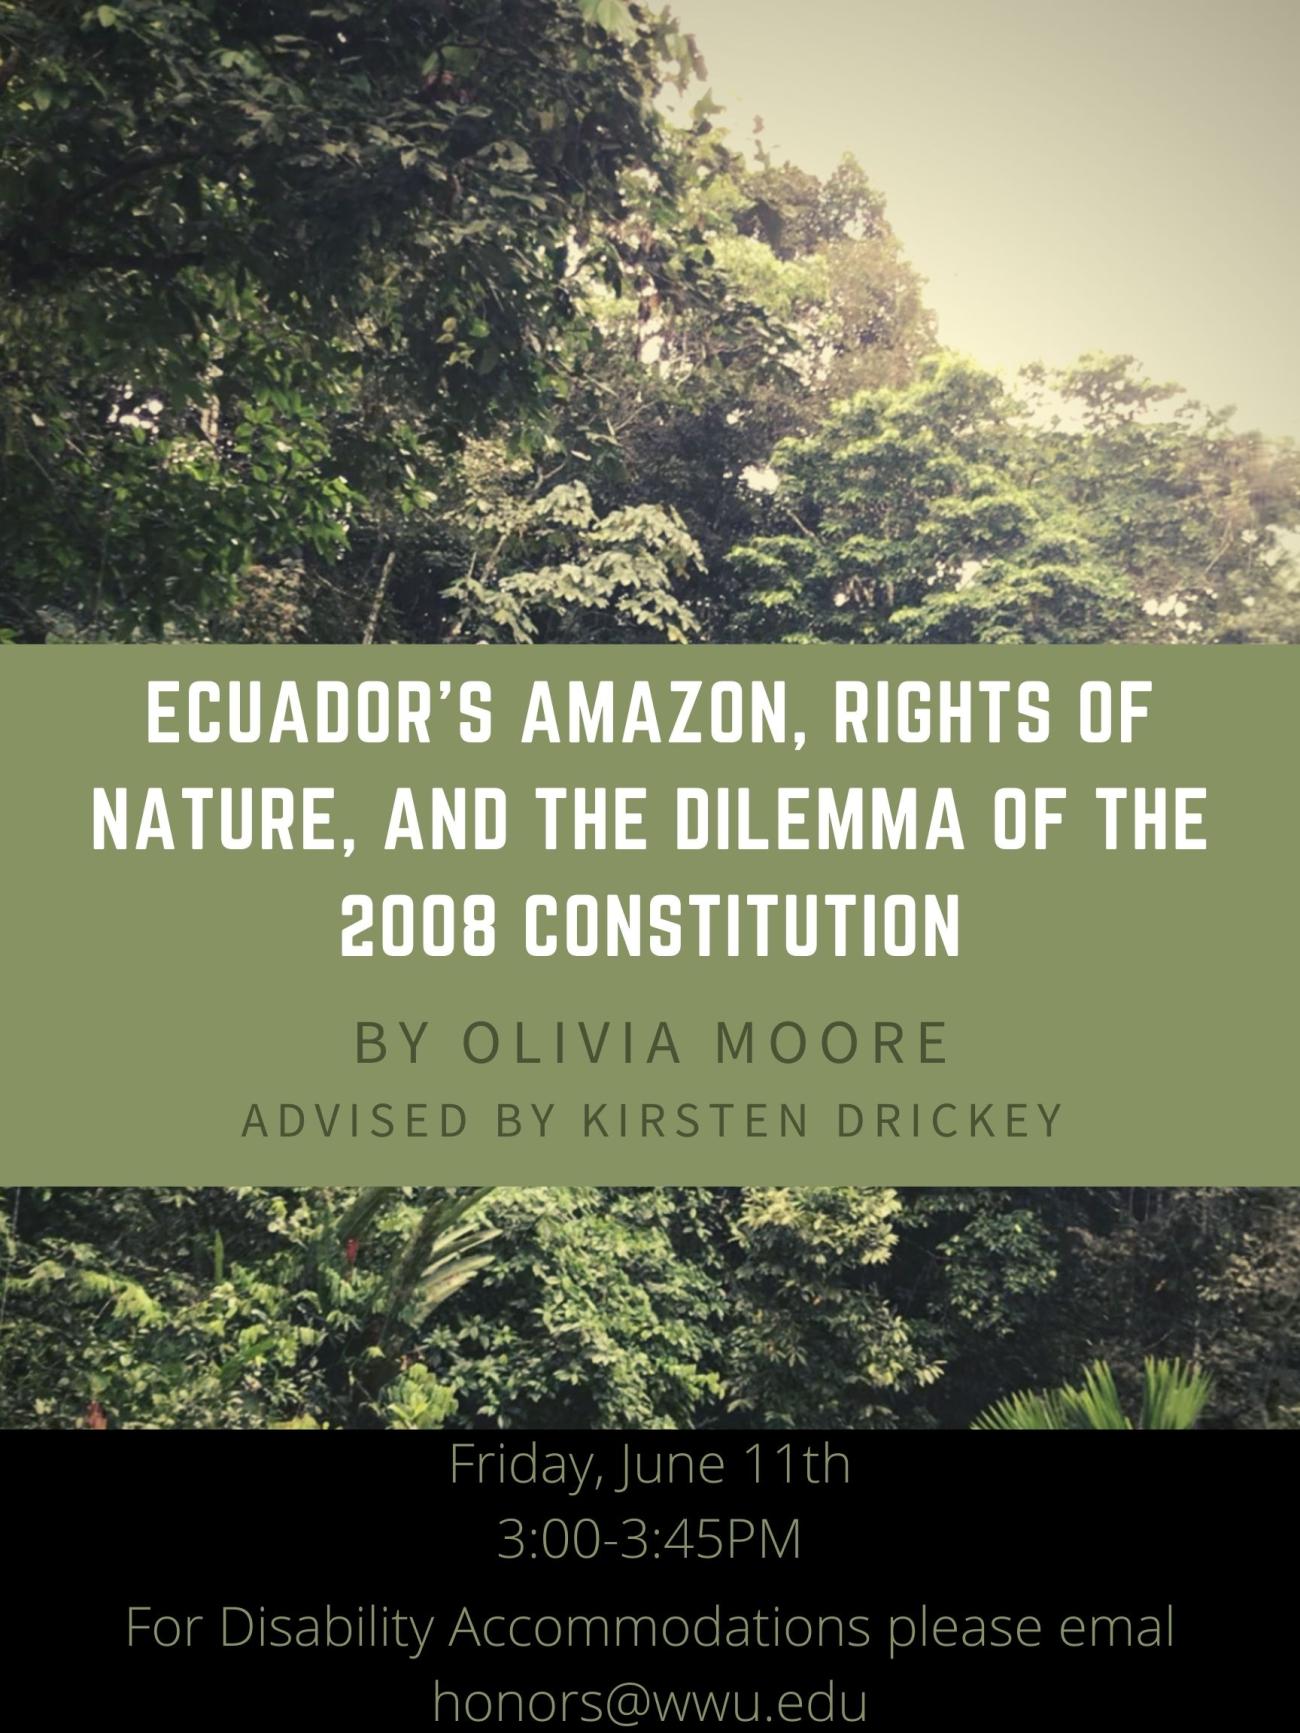 Photo of green treetops with text that readse: "Ecuador's Amazon, Rights of Nature, and the Dilemma of the 2008 Constitution. By Olivia Moore. Advised by Kirsten Drickey. Friday, June 11th, 3:00-3:45PM. For disability accommodations please email honors@wwu.edu".